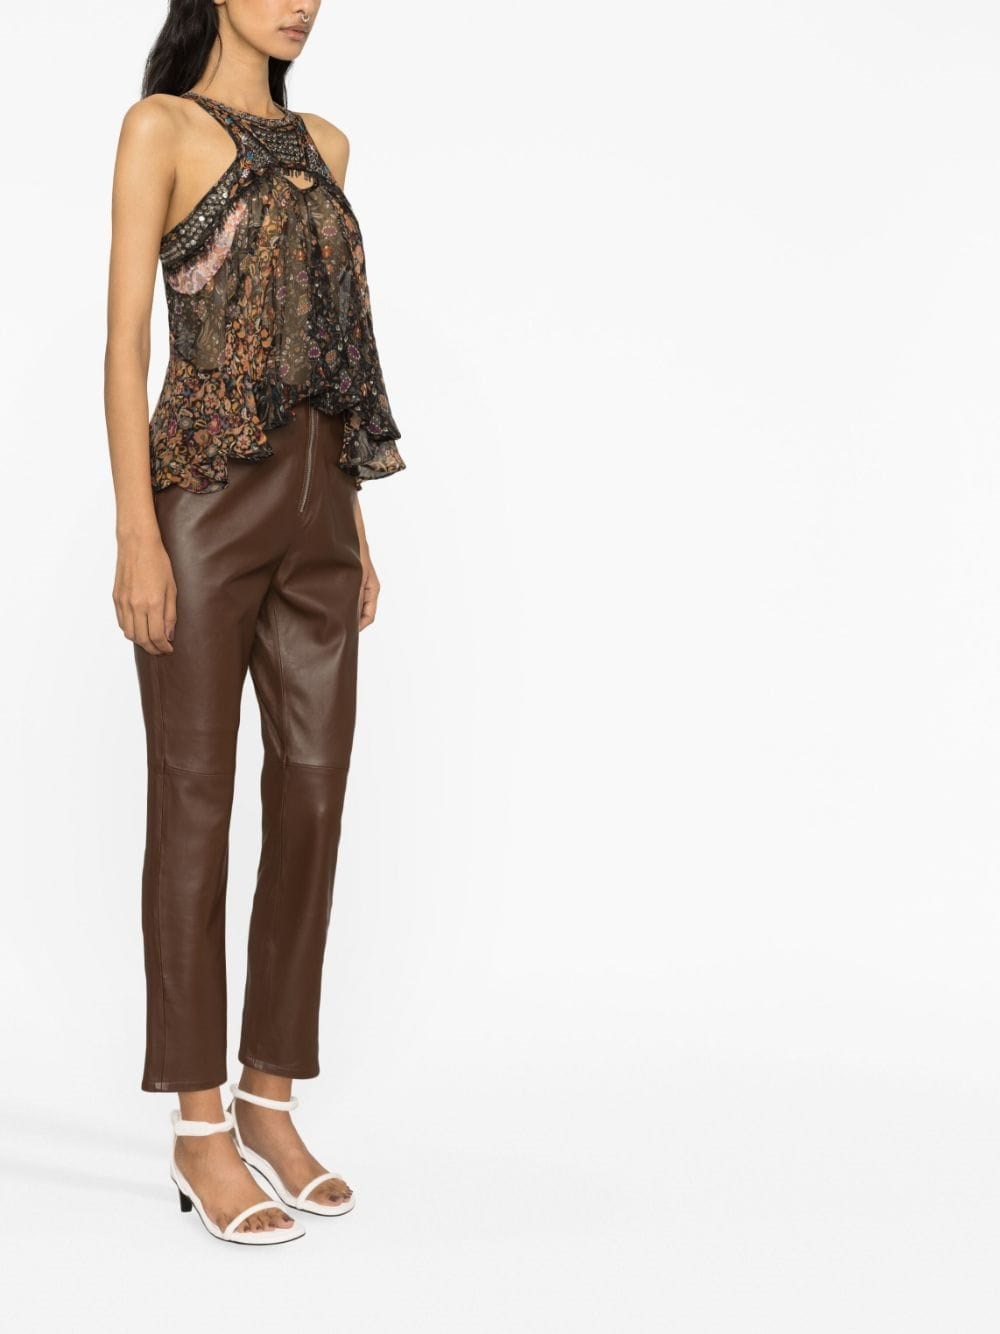 isabel marant ONYLE TOP available on montiboutique.com - 54817